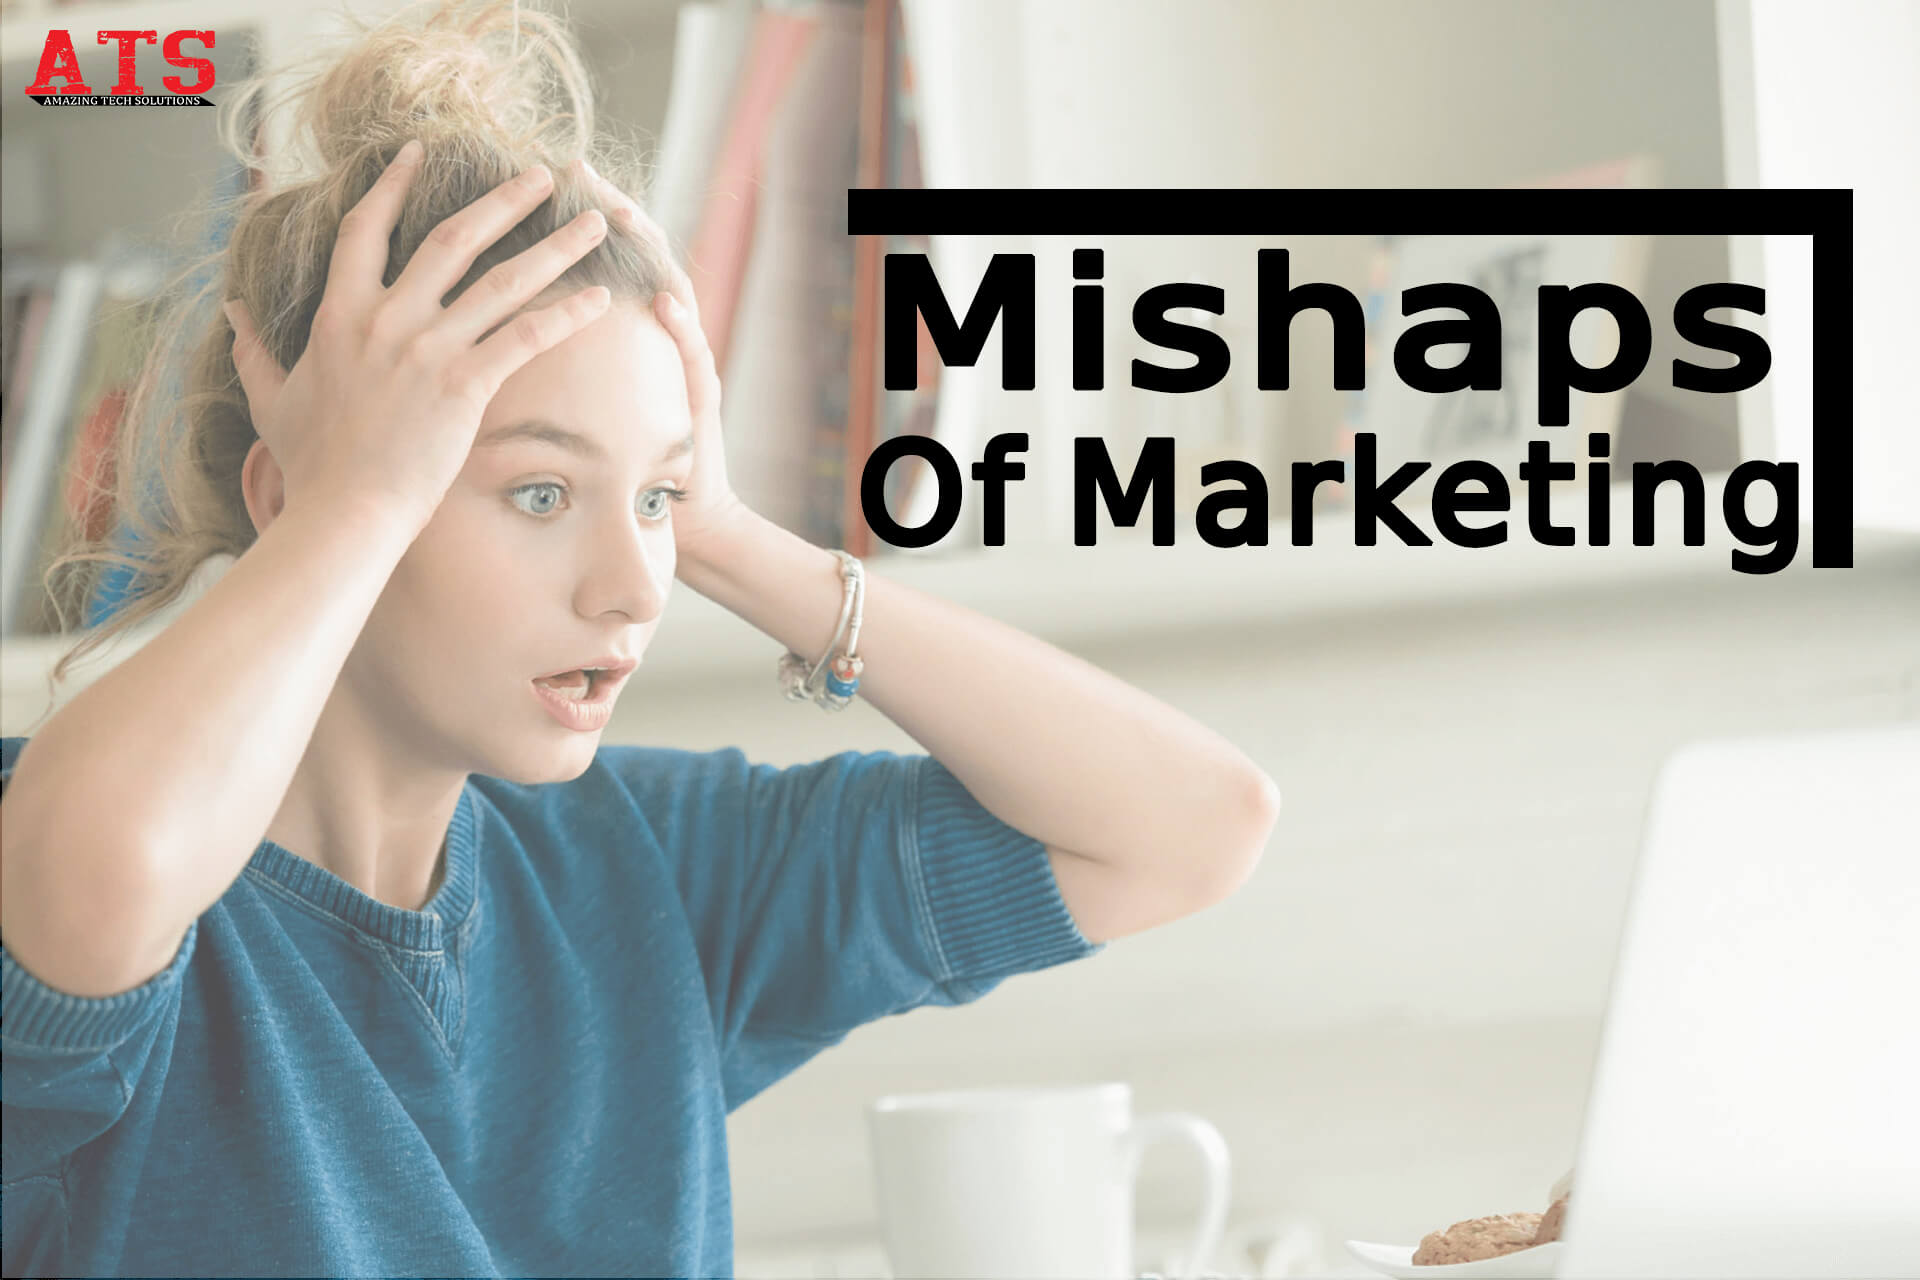 Mishaps of marketing in businesses